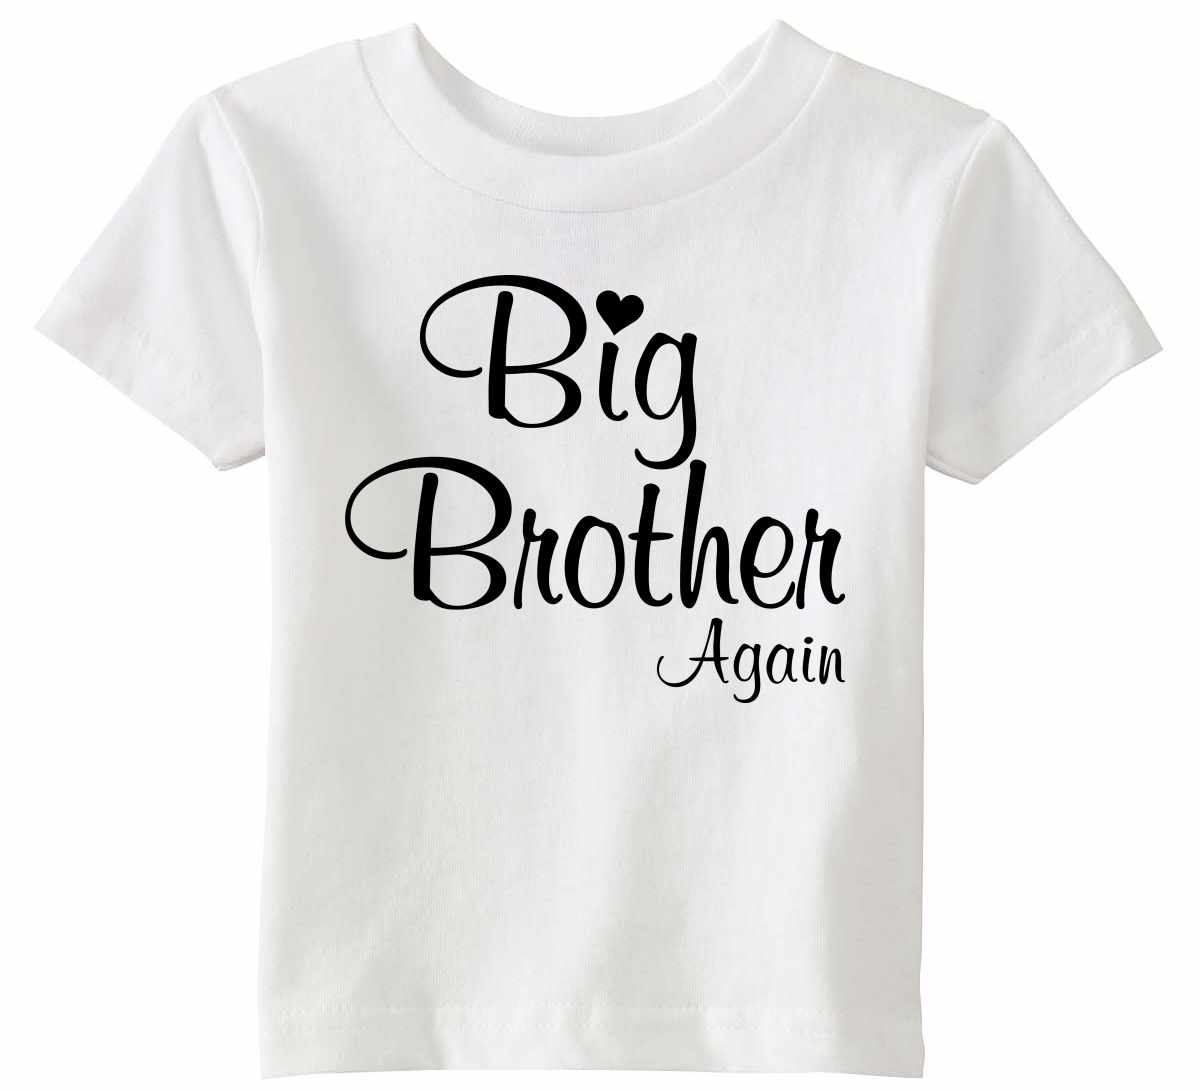 Big Brother Again on Infant-Toddler T-Shirt (#1337-7)